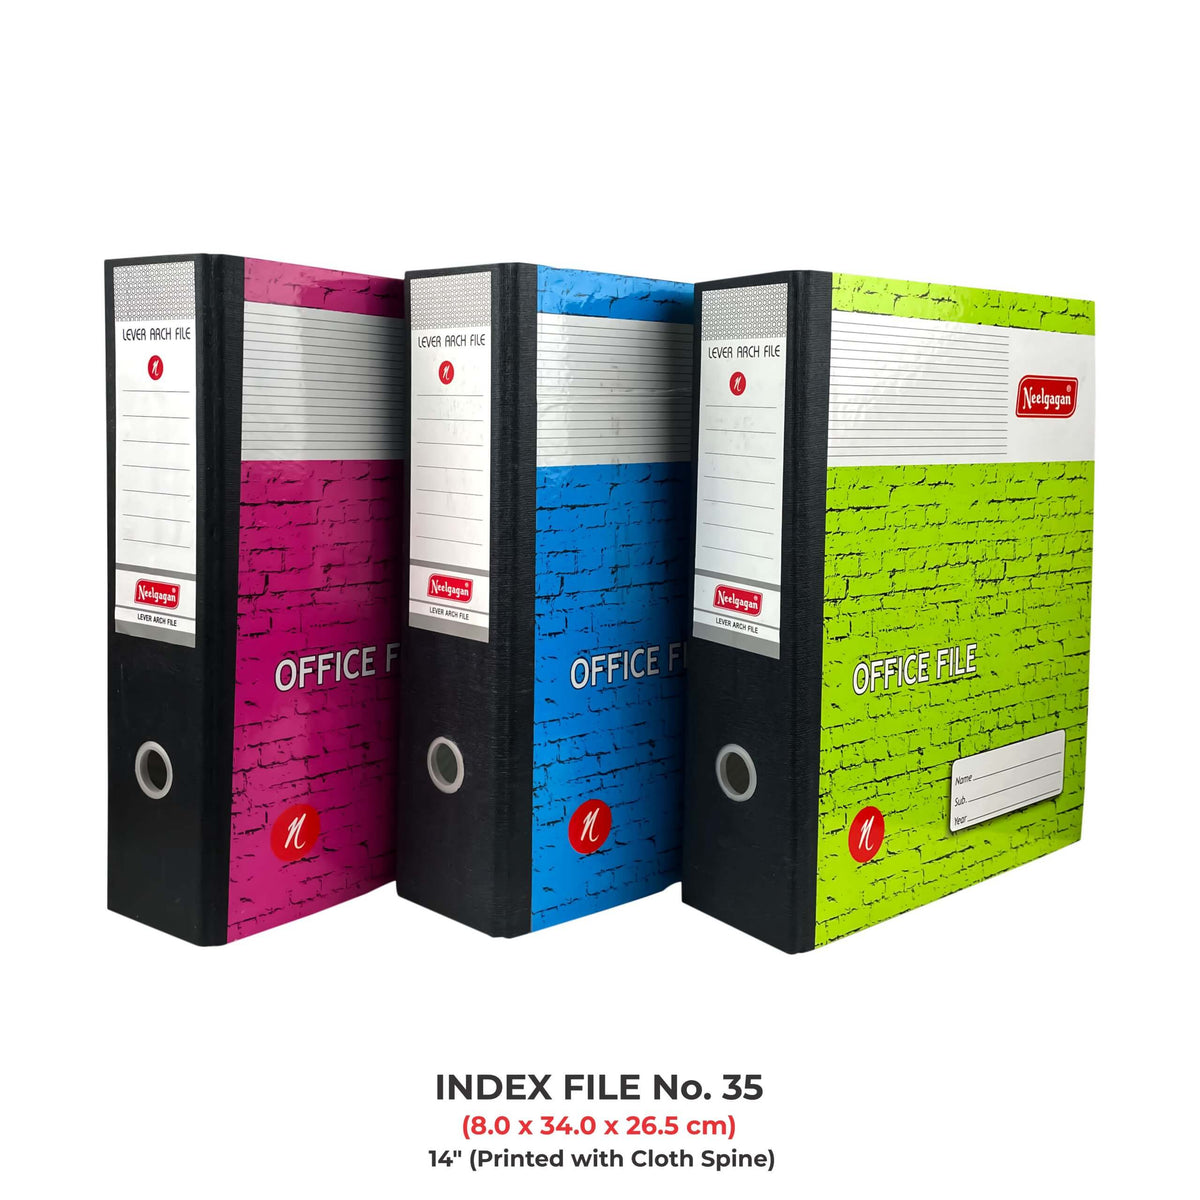 Index File (Printed with Cloth Spine) (Lever Arch - Box File) No.35 (14 inch)